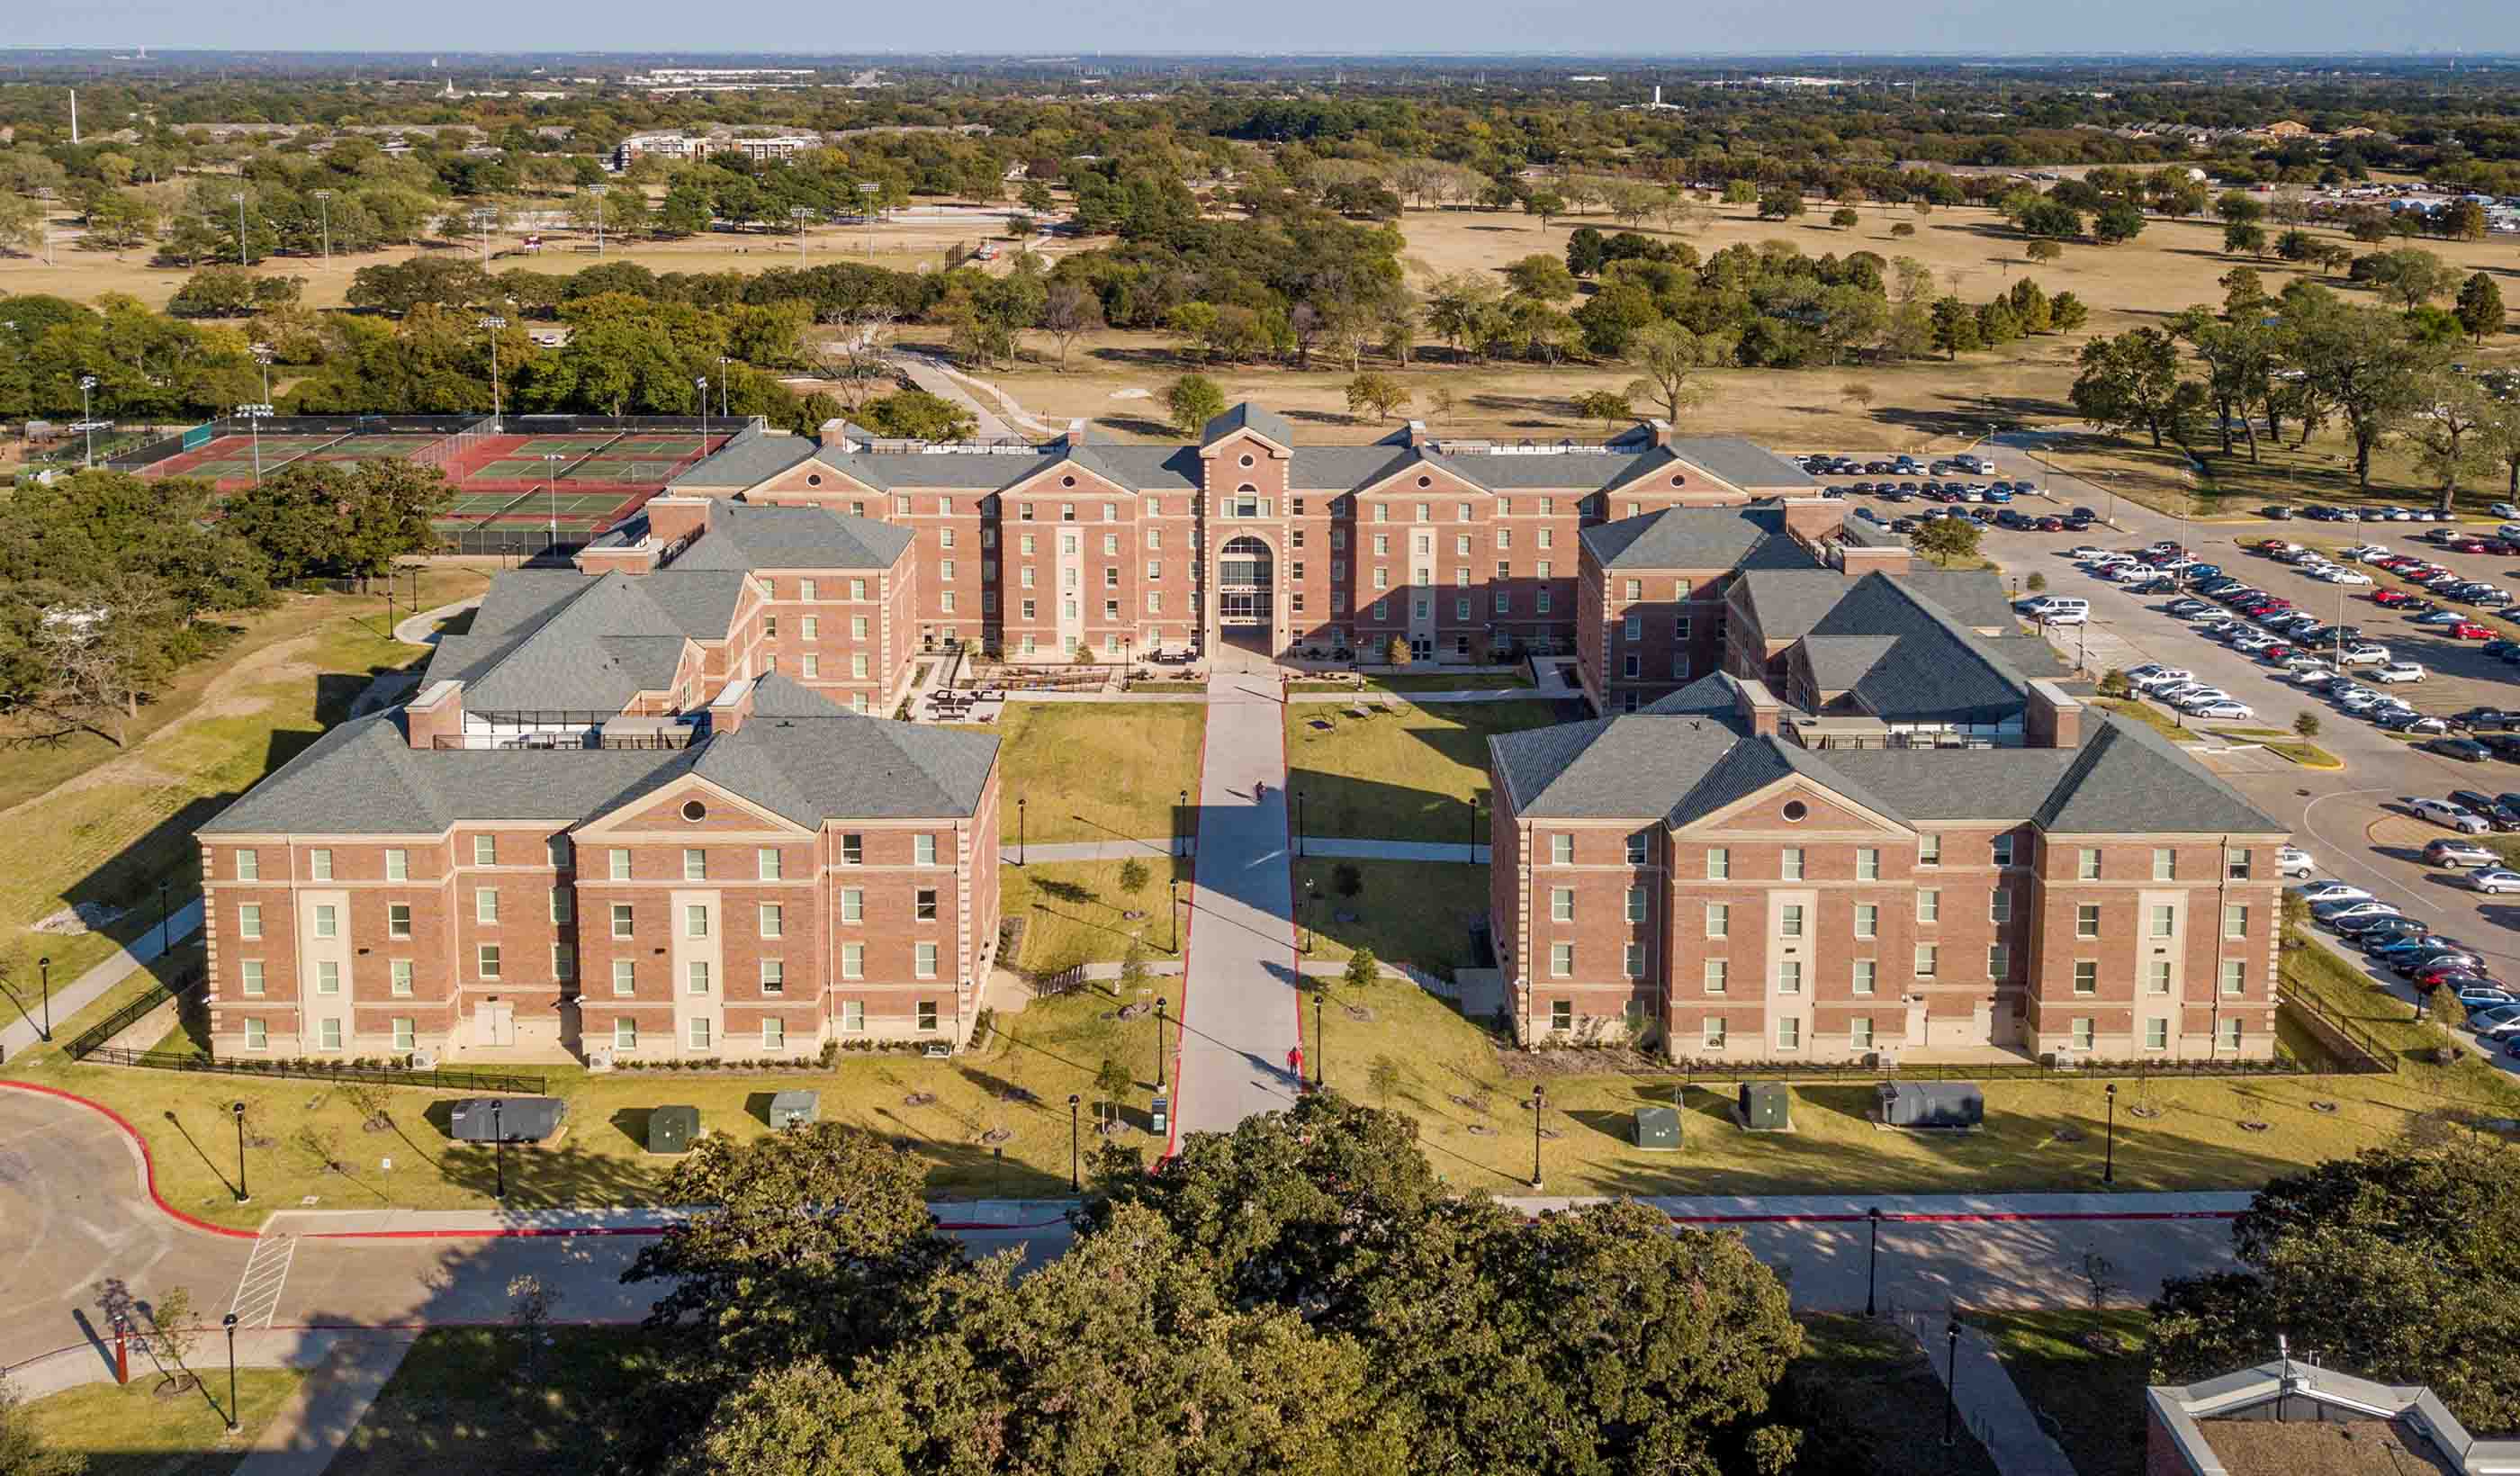 Texas Woman’s University, Parliament Village and Dining Hall